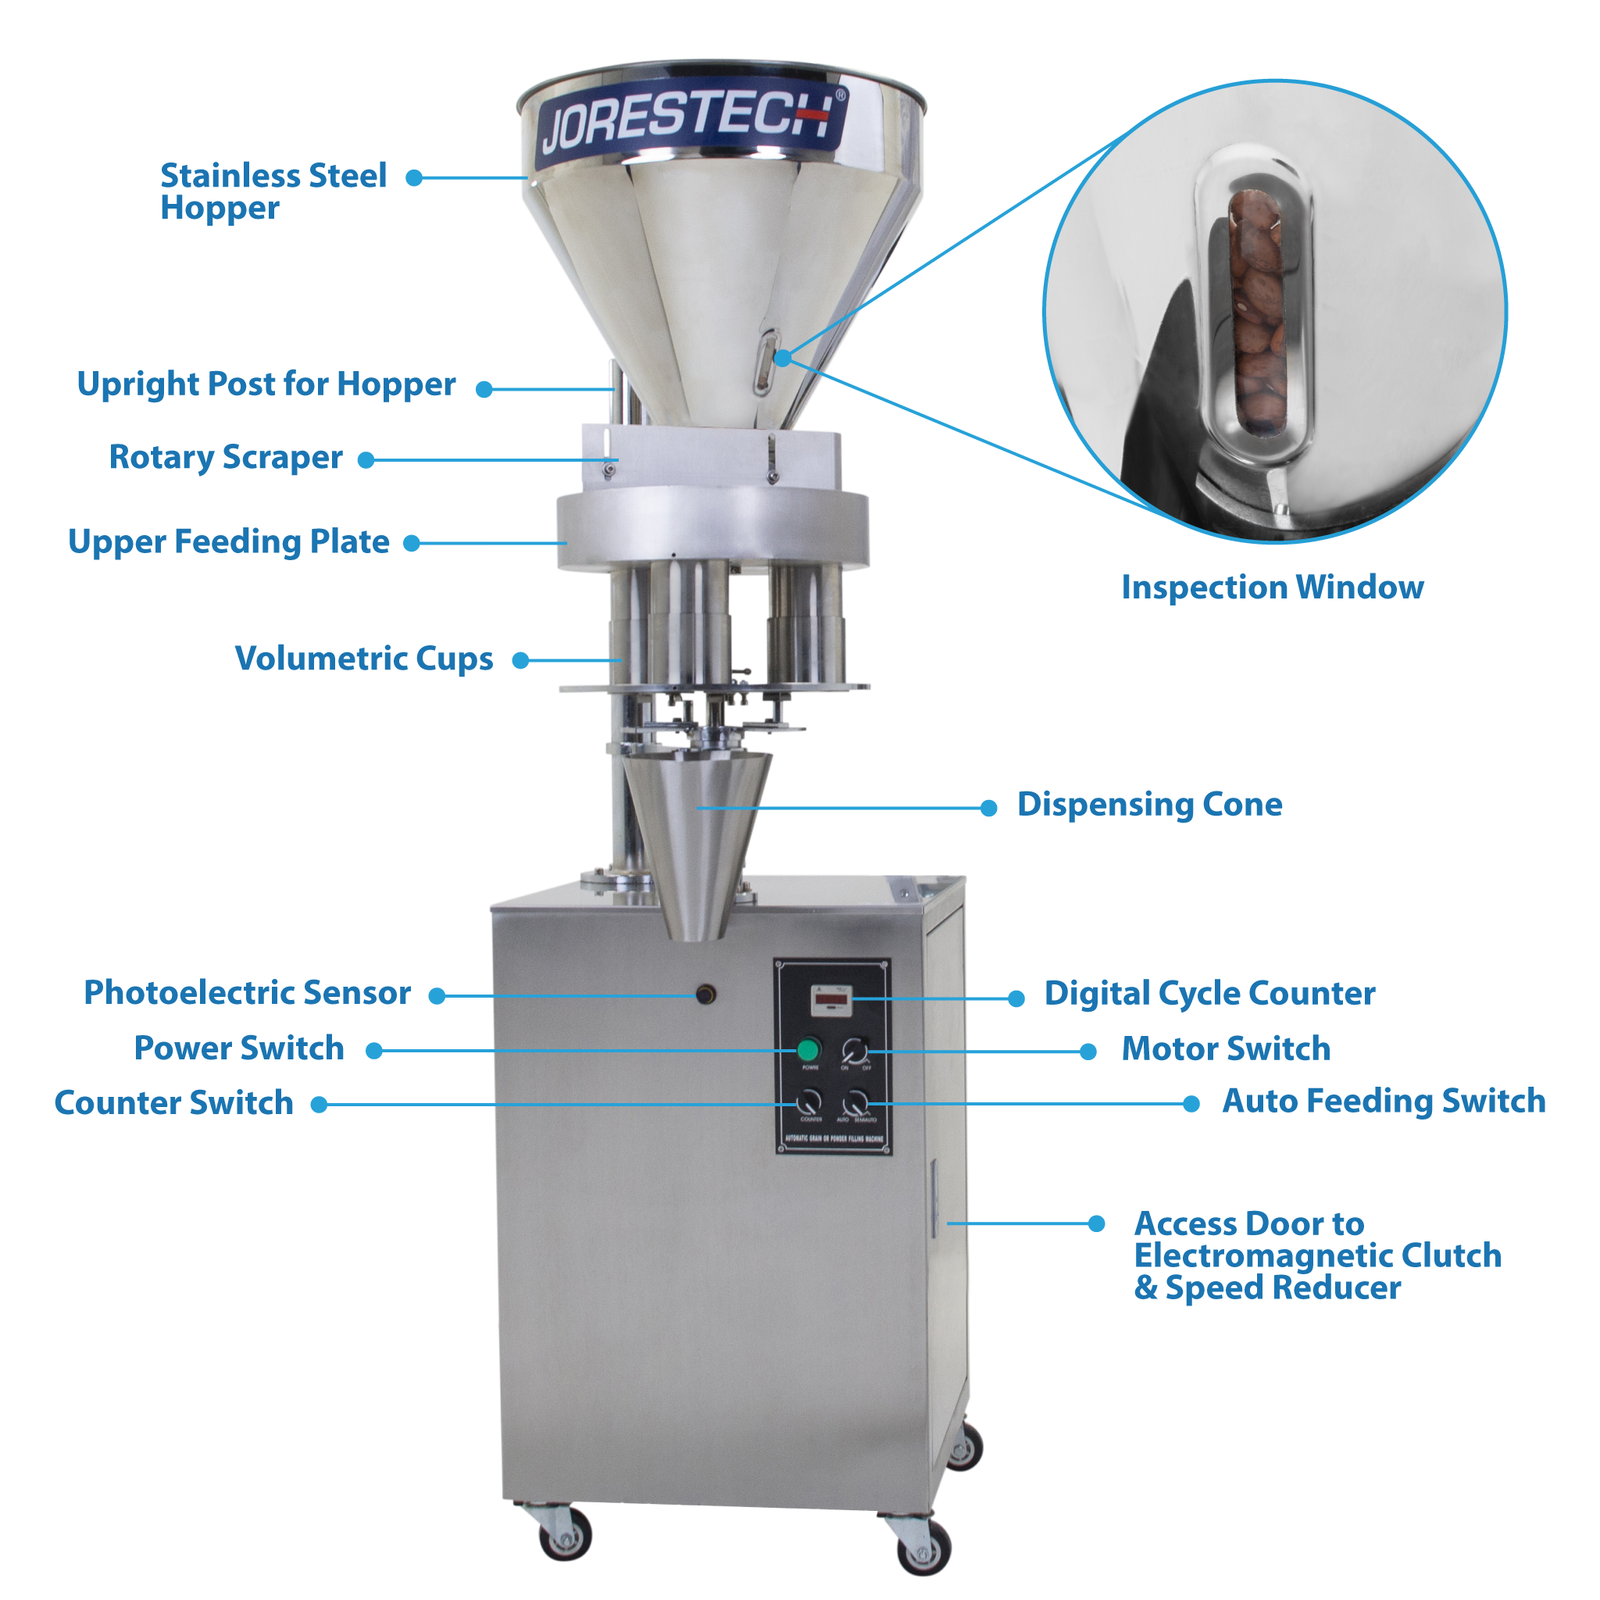 Infographic of the JORES TECHNOLOGIES® semi automatic volumetric filler. Call-outs signal different parts of the filling machine like: the Inspection Window, stainless steel hopper, auto feeding switch, rotary scraper and more..